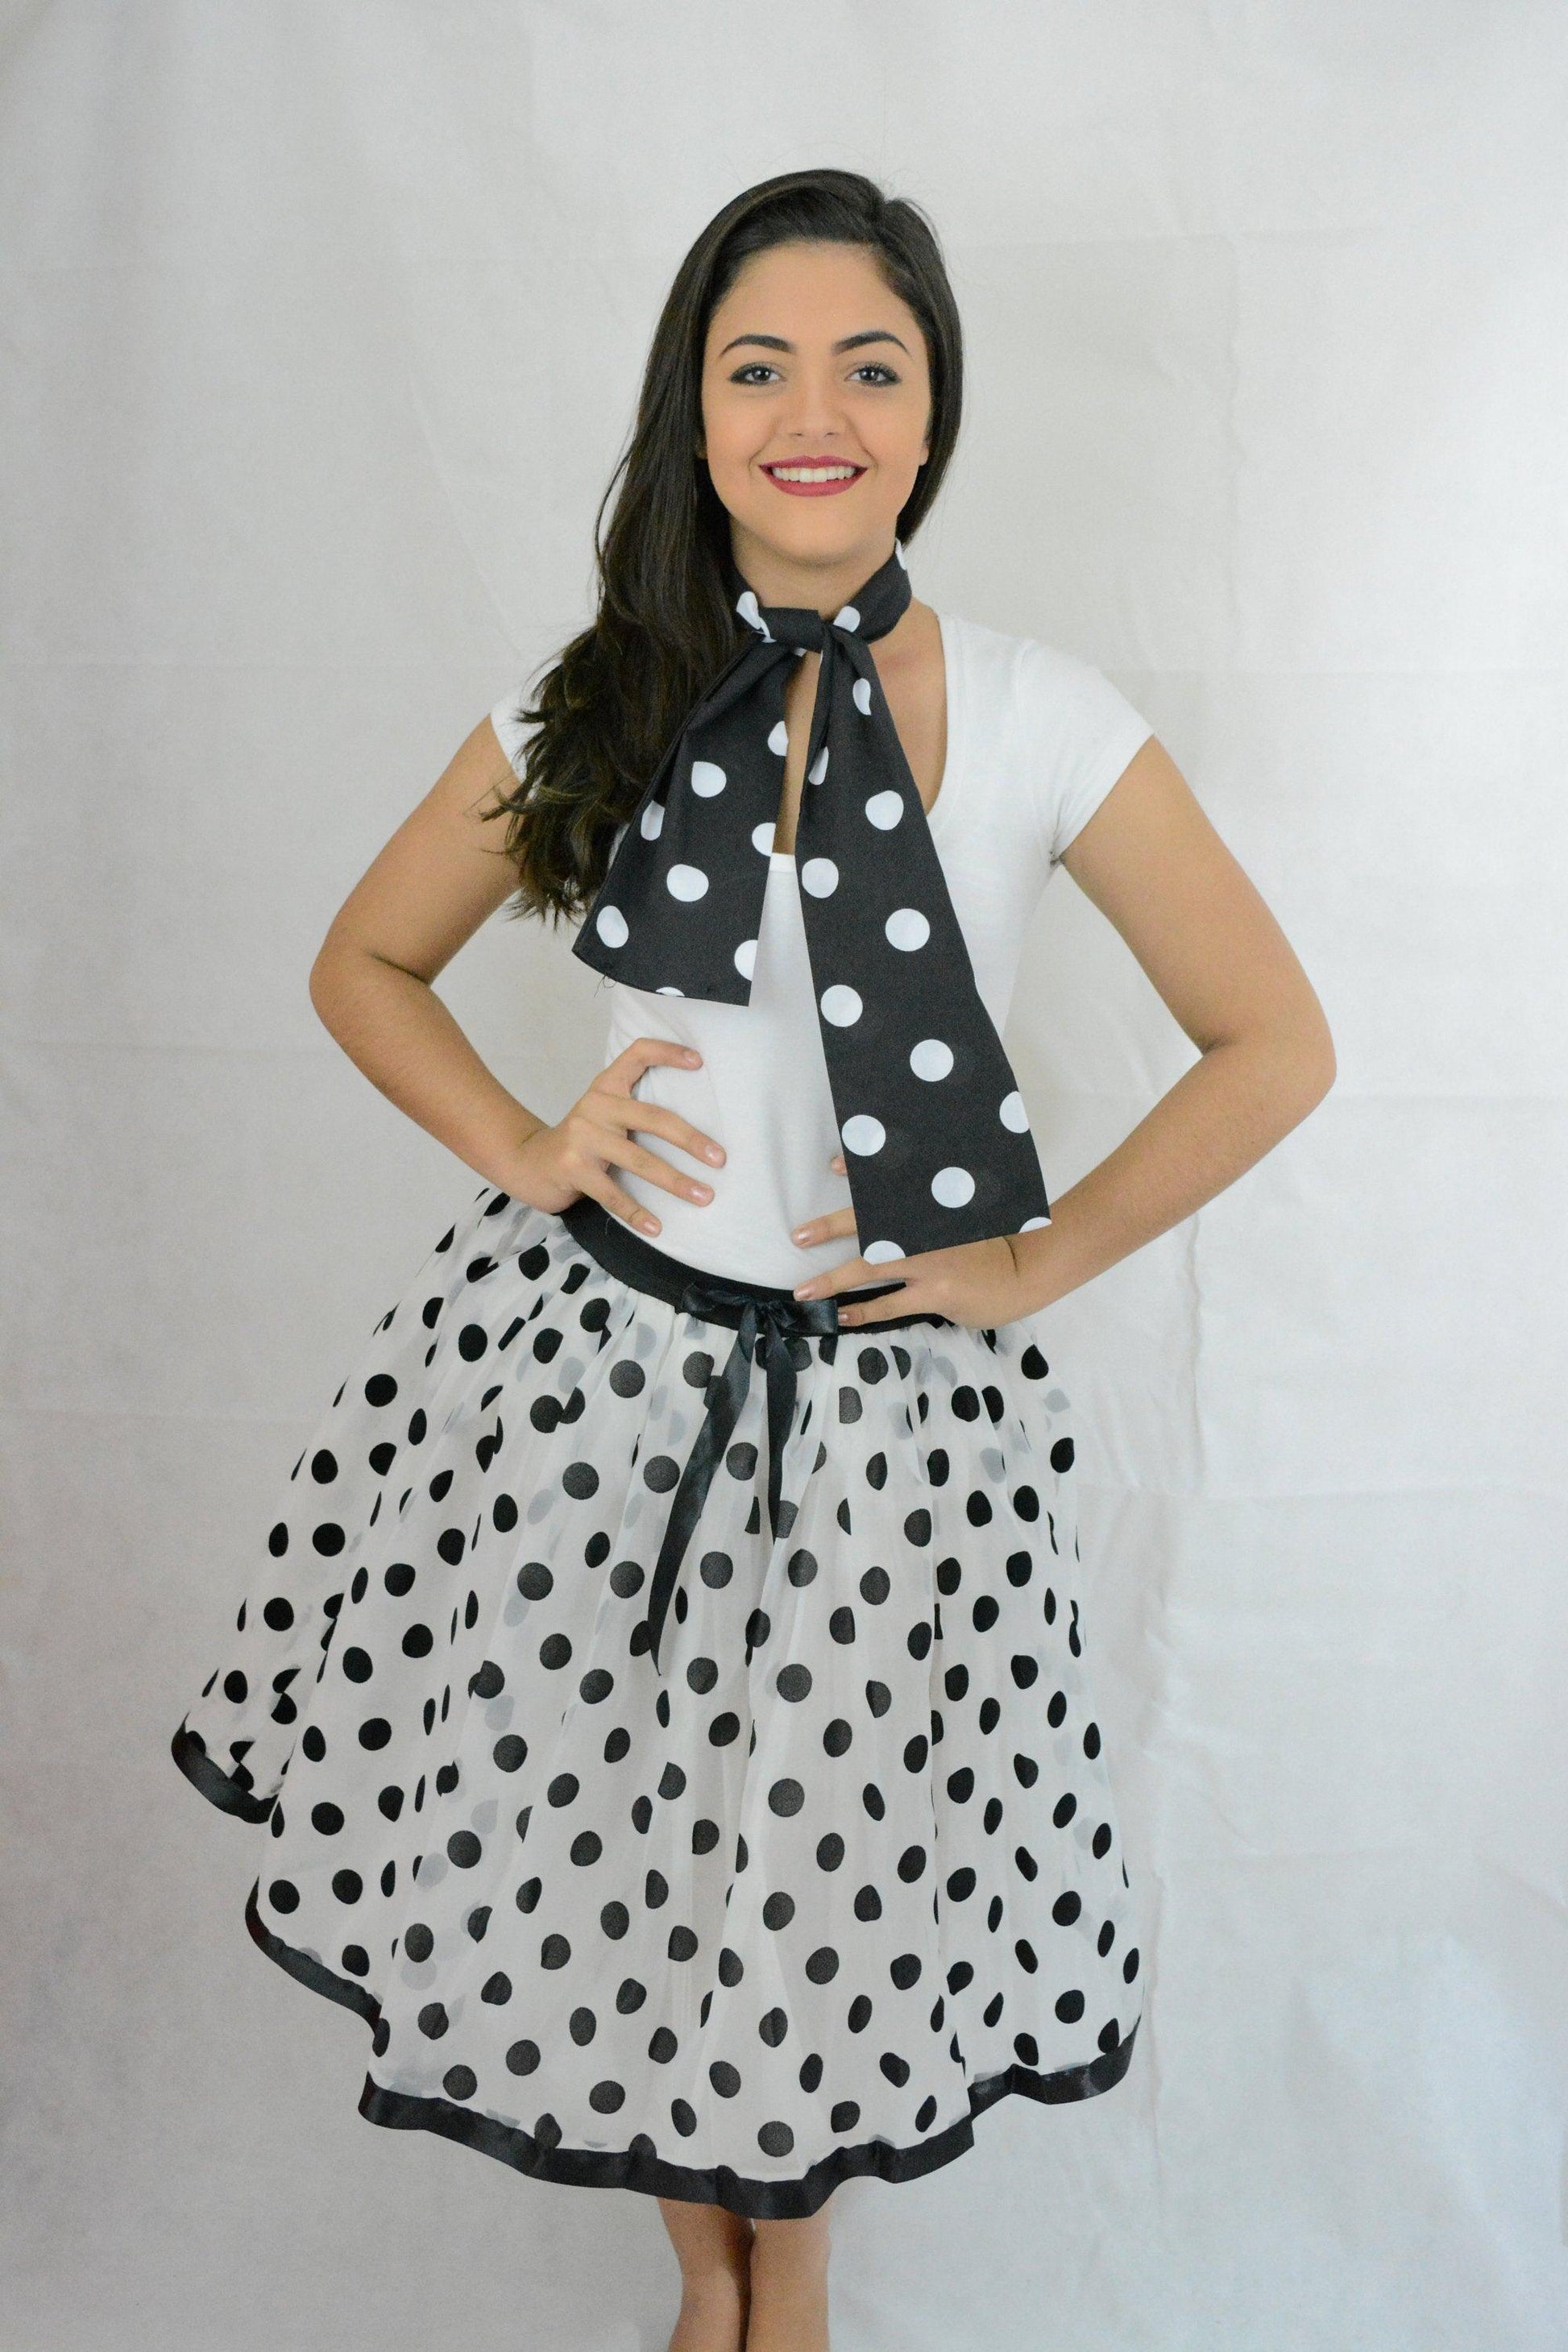 White Black Polka Dot Chiffon Skirt with Netted Petticoat (18 Inches) - Labreeze